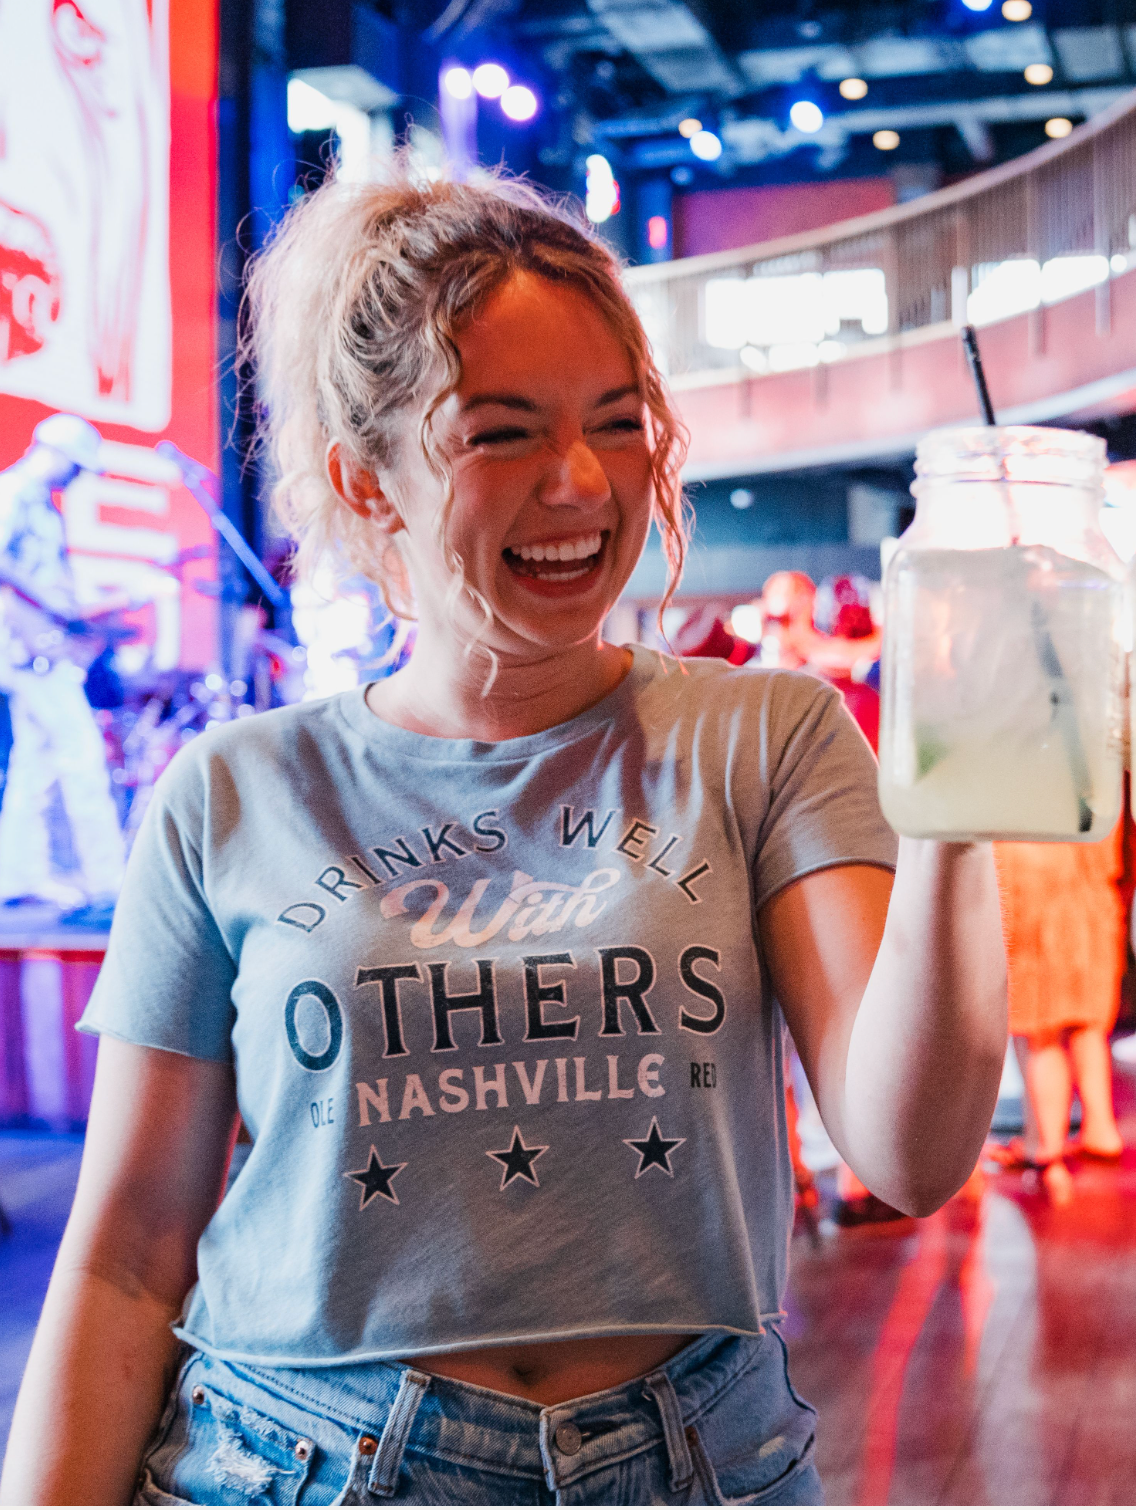 Ole Red Nashville Women's Drinks Well With Others Cropped T-Shirt